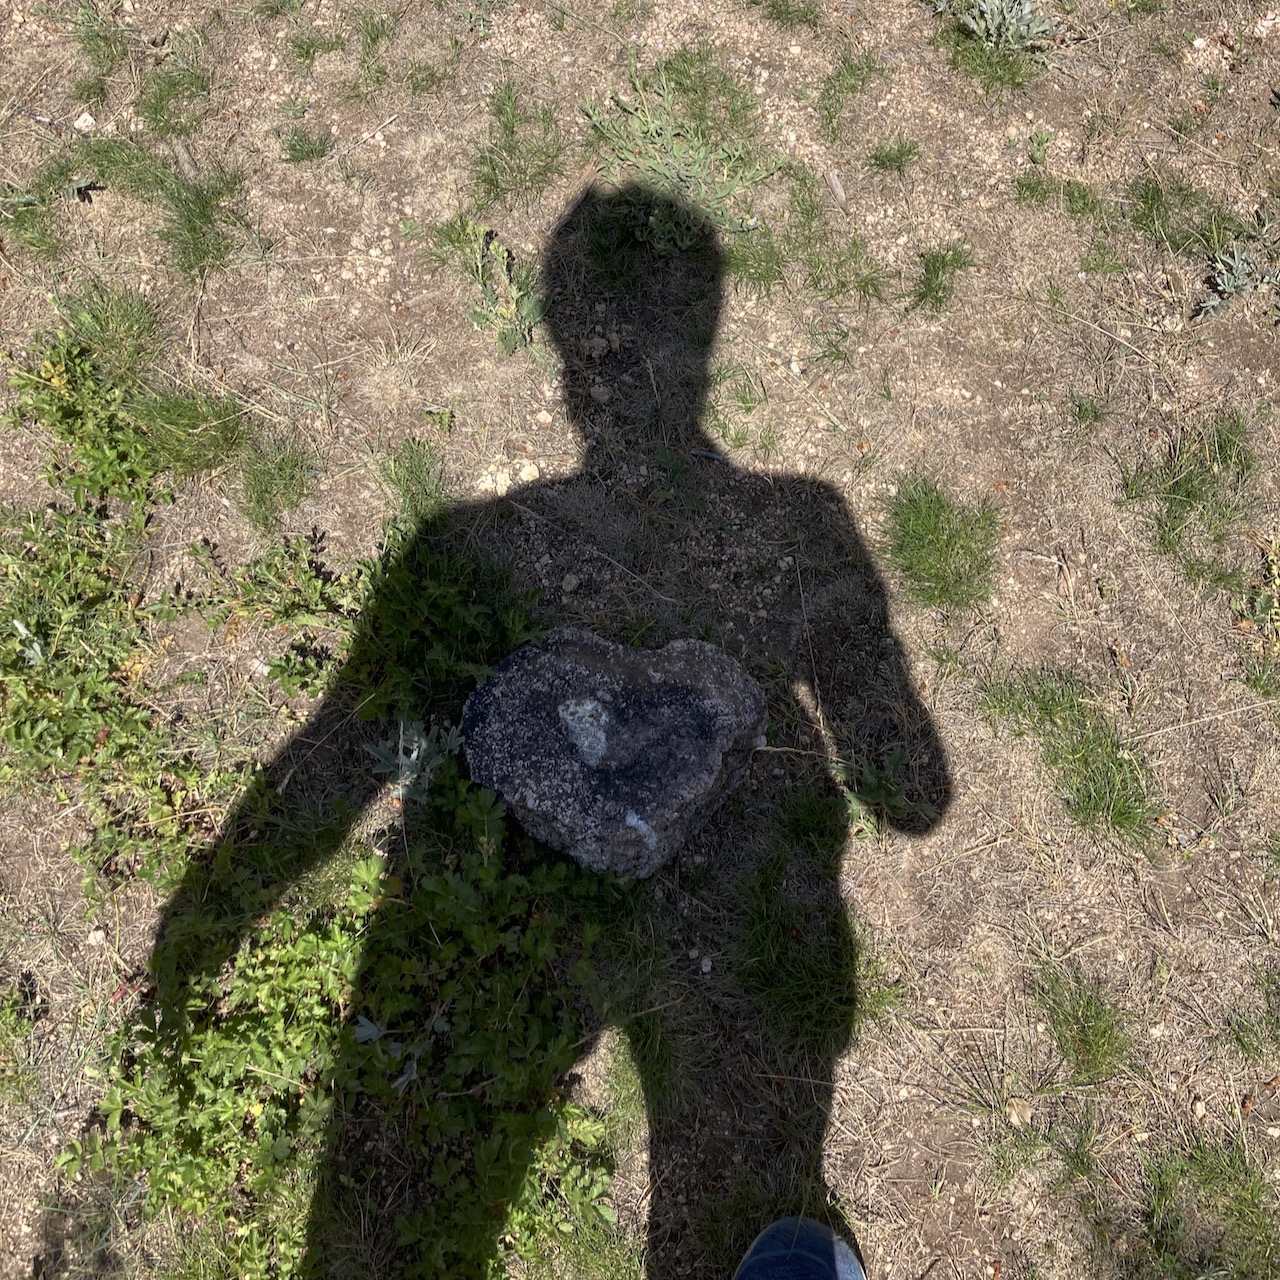 Caleb's shadow is seen on the grass with a rock in the shape of a heart sitting under the shadow's chest.